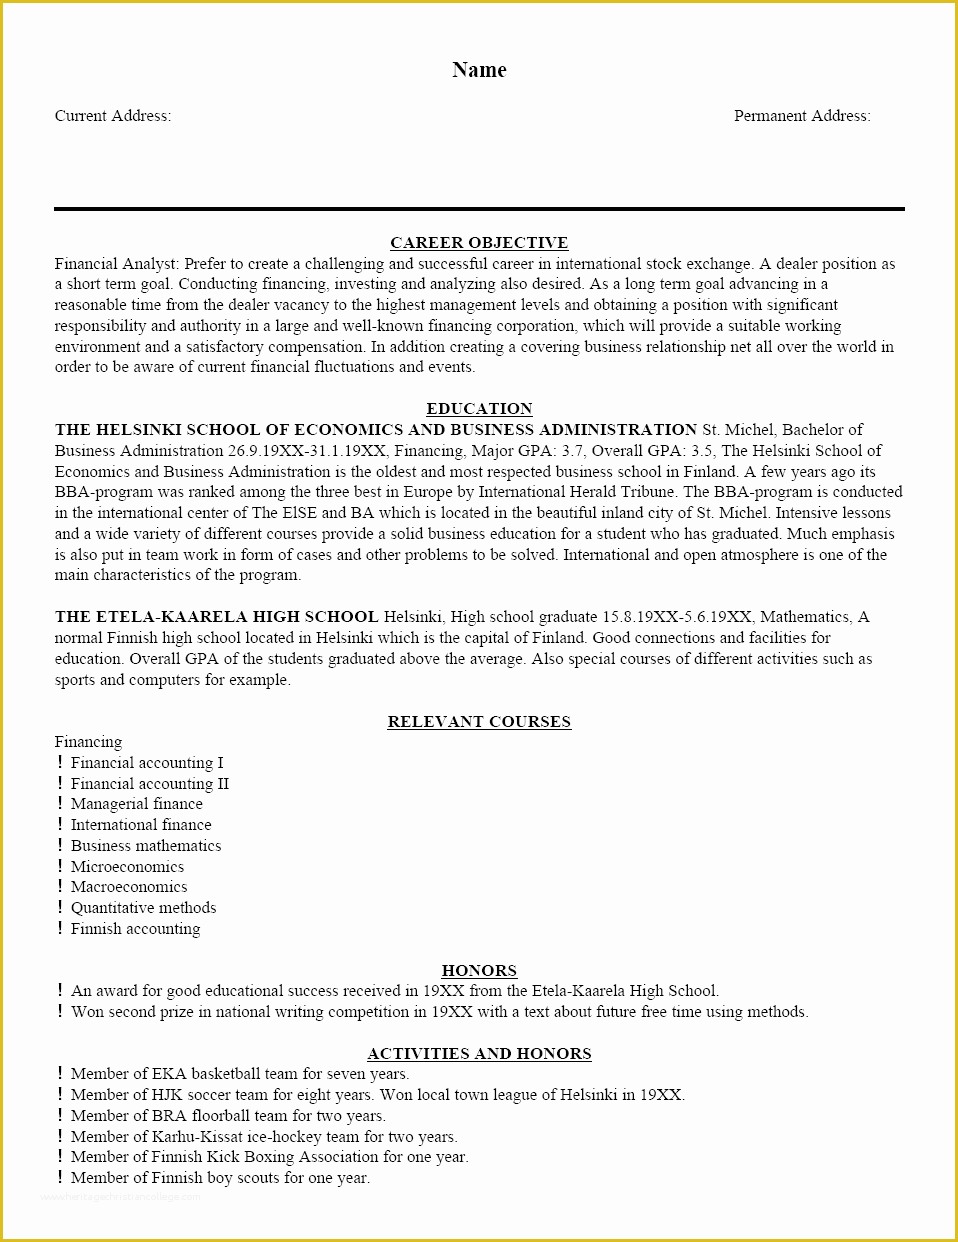 Free Resume Letter Templates Of Free Sample Resume Template Cover Letter and Resume